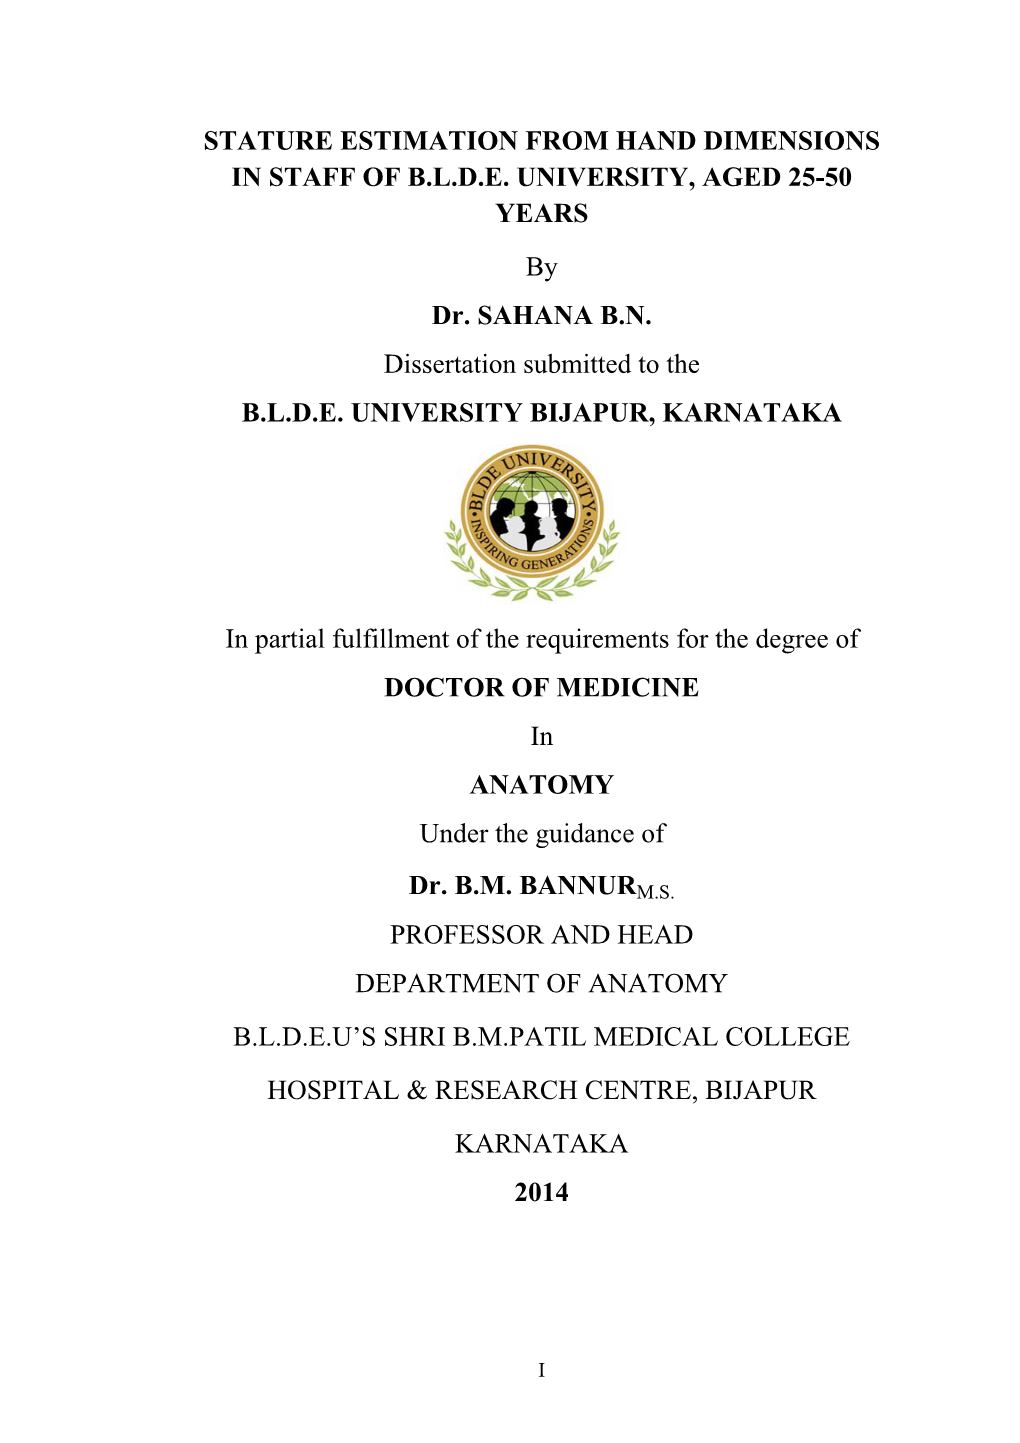 STATURE ESTIMATION from HAND DIMENSIONS in STAFF of B.L.D.E. UNIVERSITY, AGED 25-50 YEARS by Dr. SAHANA B.N. Dissertation Submitted to the B.L.D.E